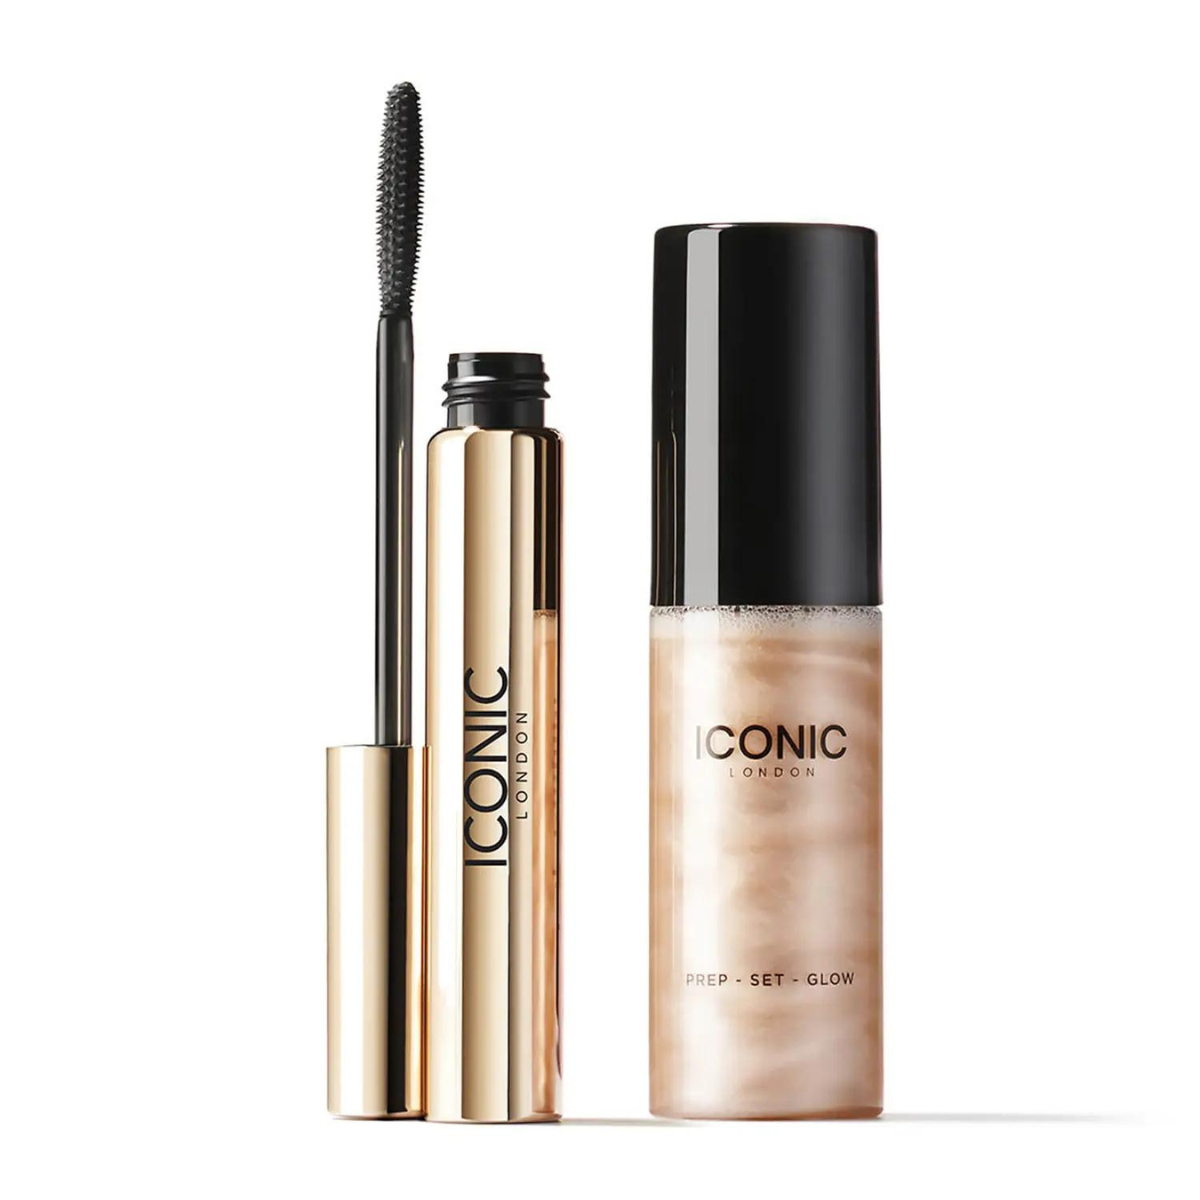 Iconic London All Wrapped Up - Stocking Filler Gift Set SAVE 33%